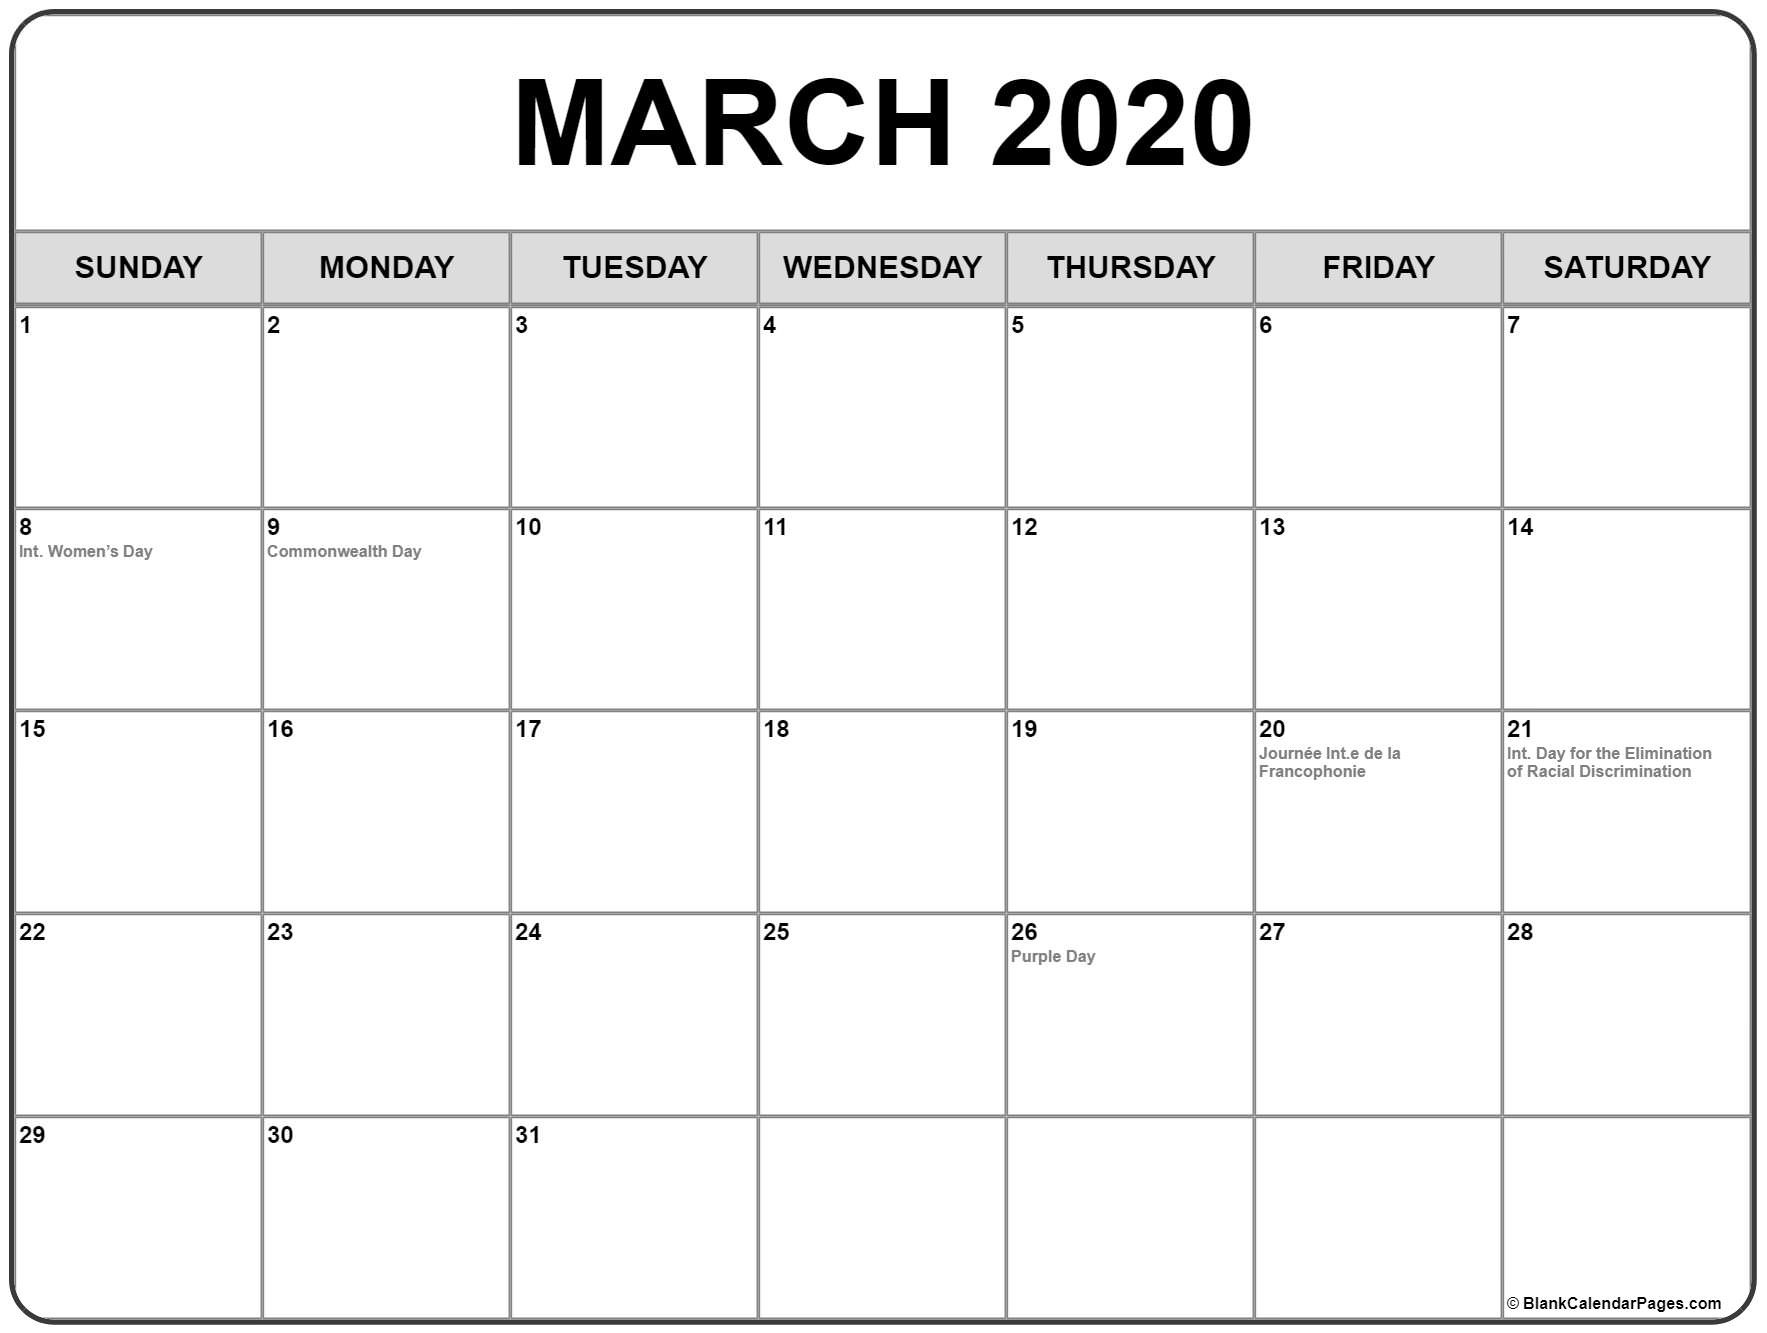 collection of march 2020 calendars with holidays